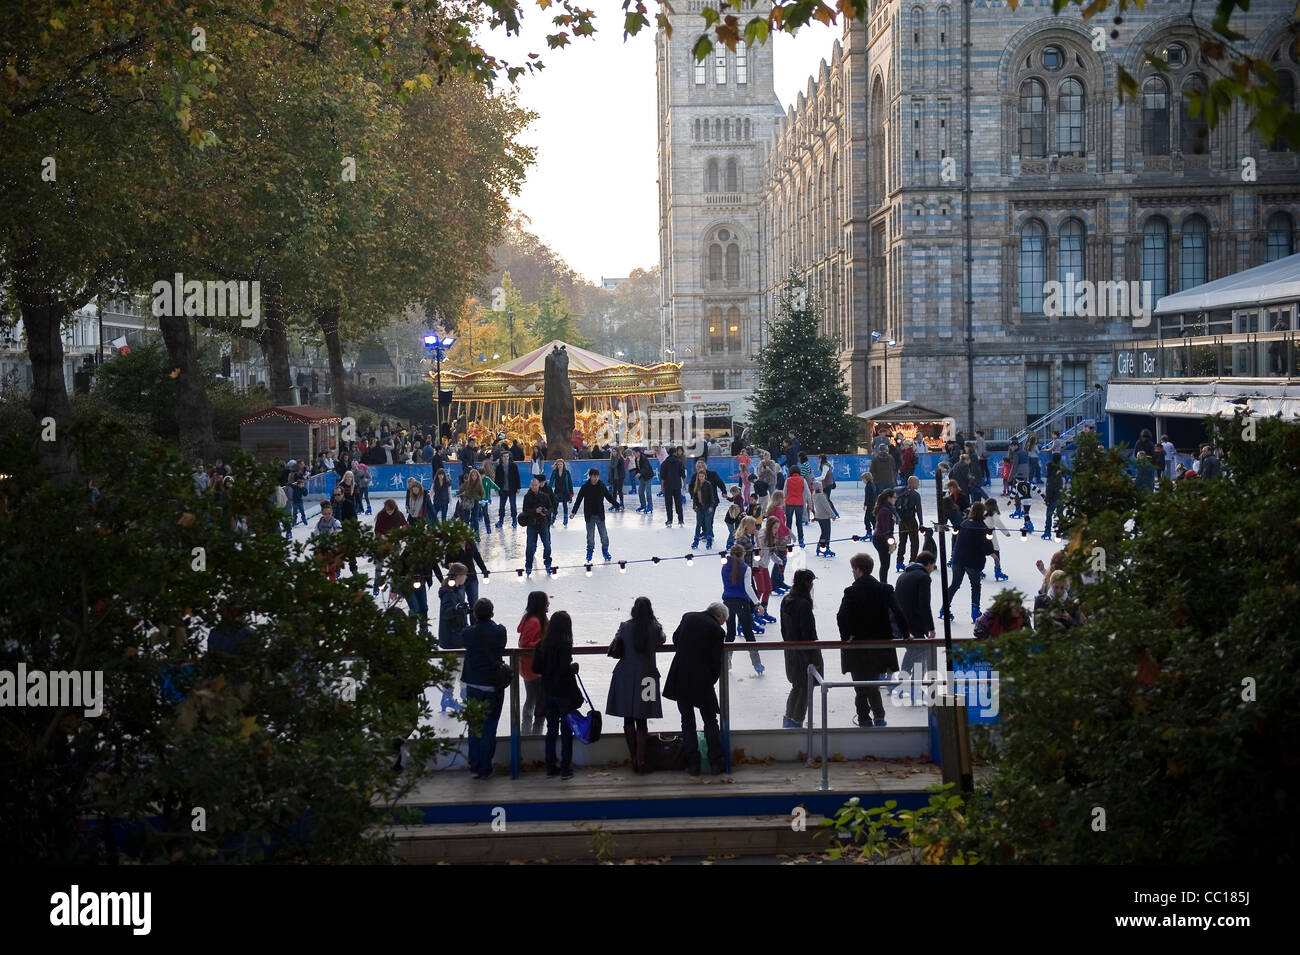 People skating on an ice rink outside the Natural History Museum, Kensington, London, UK Stock Photo